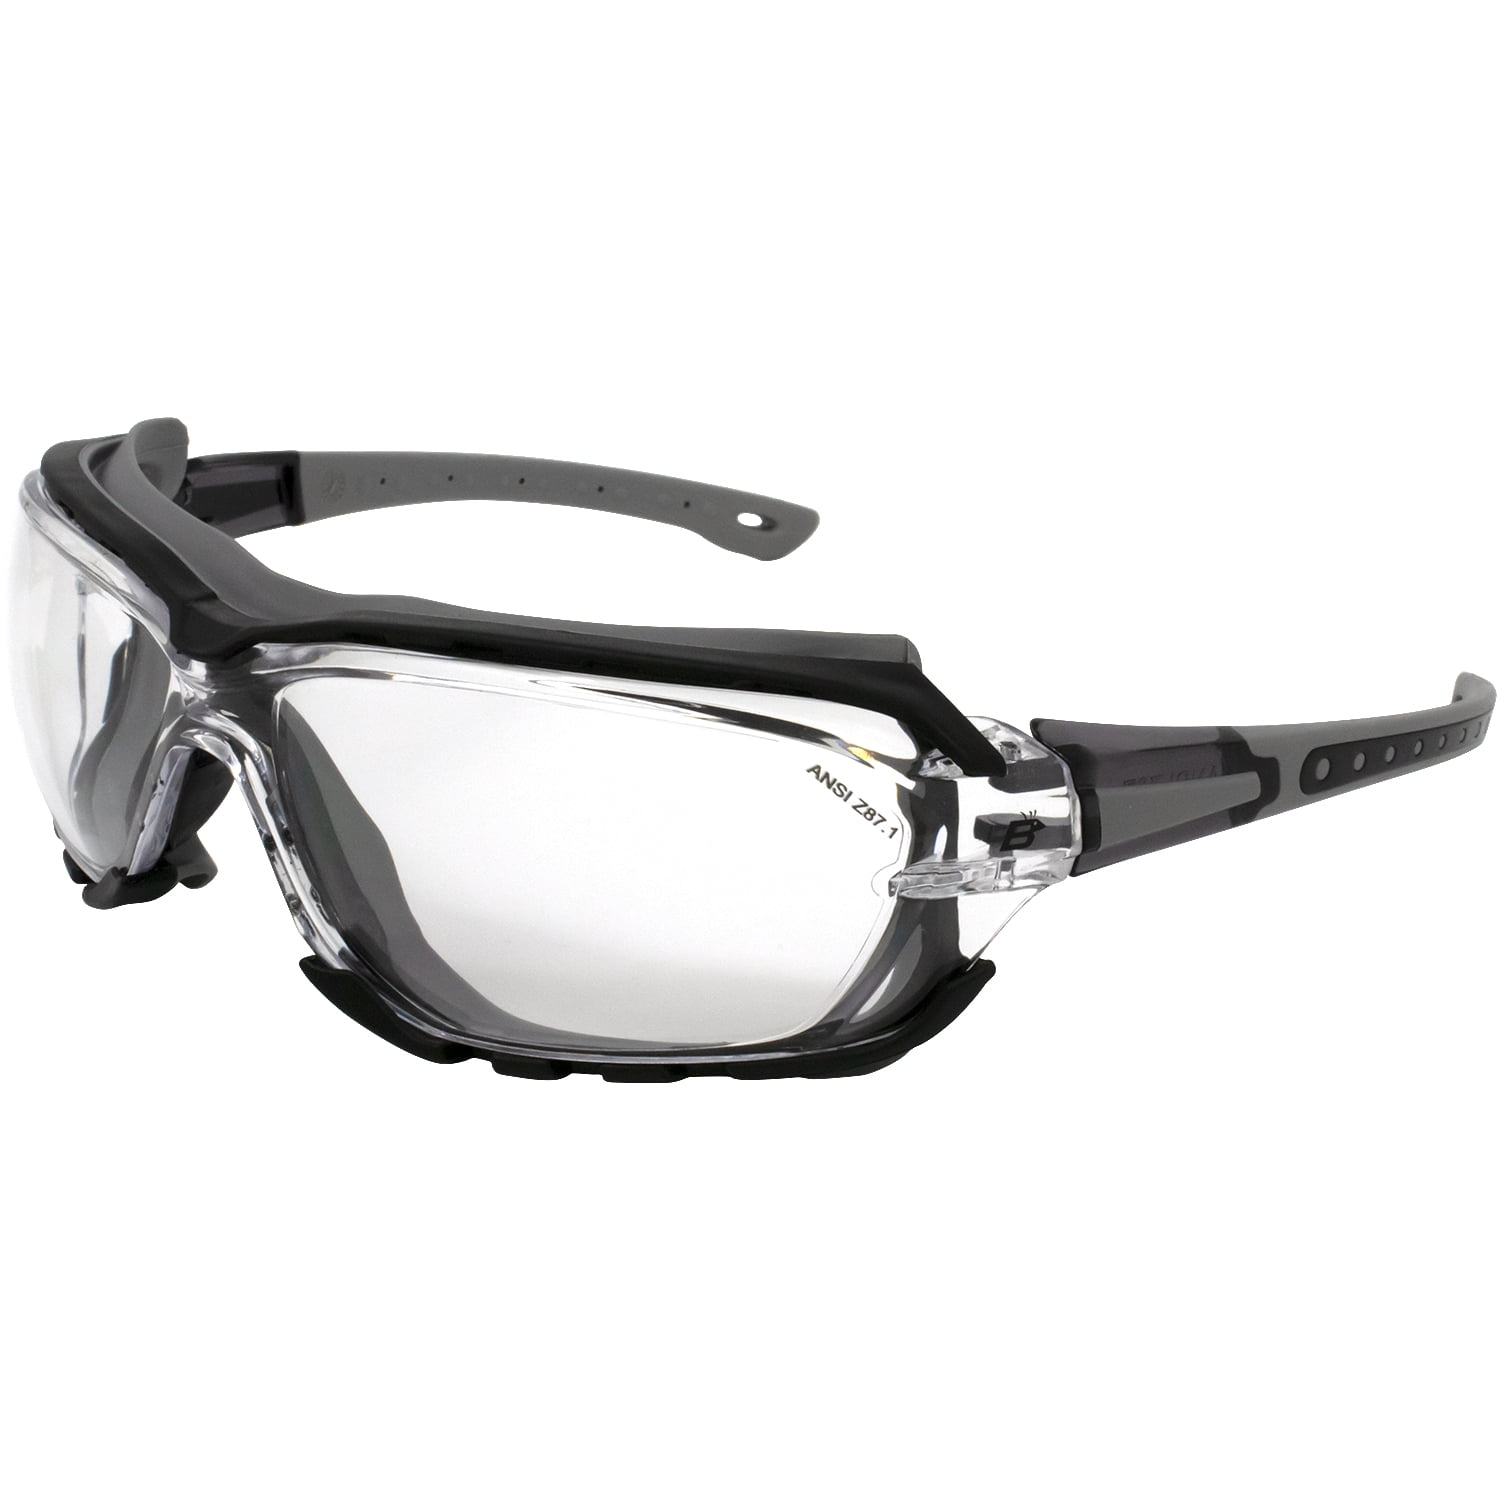 Birdz Condor Black Sport Padded Motorcycle Riding Goggle with Clear Lens 